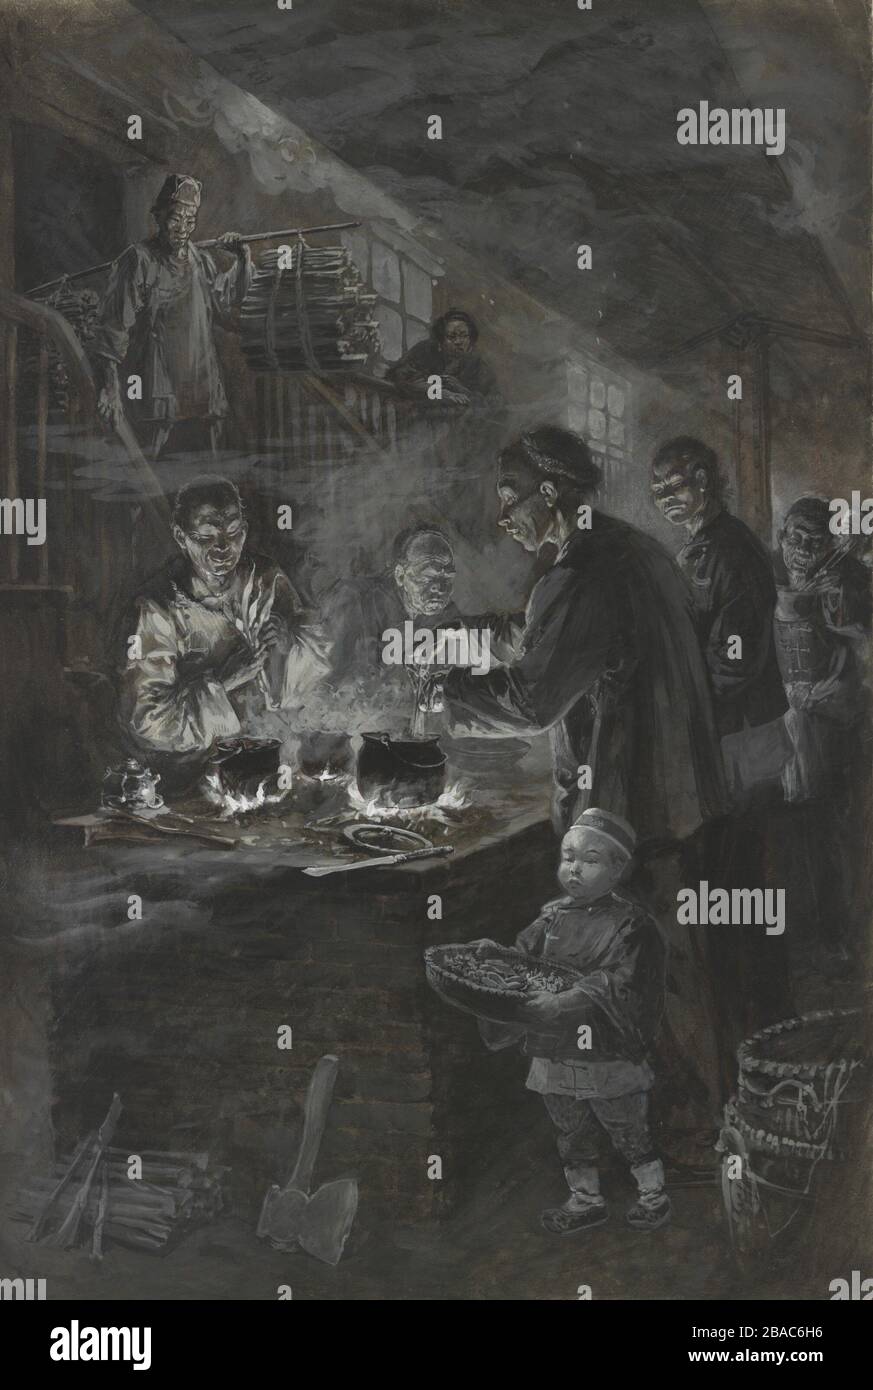 Chinese men cook in a courtyard while under quarantine during a plague epidemic in San Francisco, c. 1900. Illustration by William Allen Rogers, published in HARPER'S WEEKLY article, 'The Bubonic Plague in San Francisco'. San Francisco experience plague from 19001904 in an epidemic of centered on San Francisco's Chinatown  (BSLOC 2018 1 54) Stock Photo